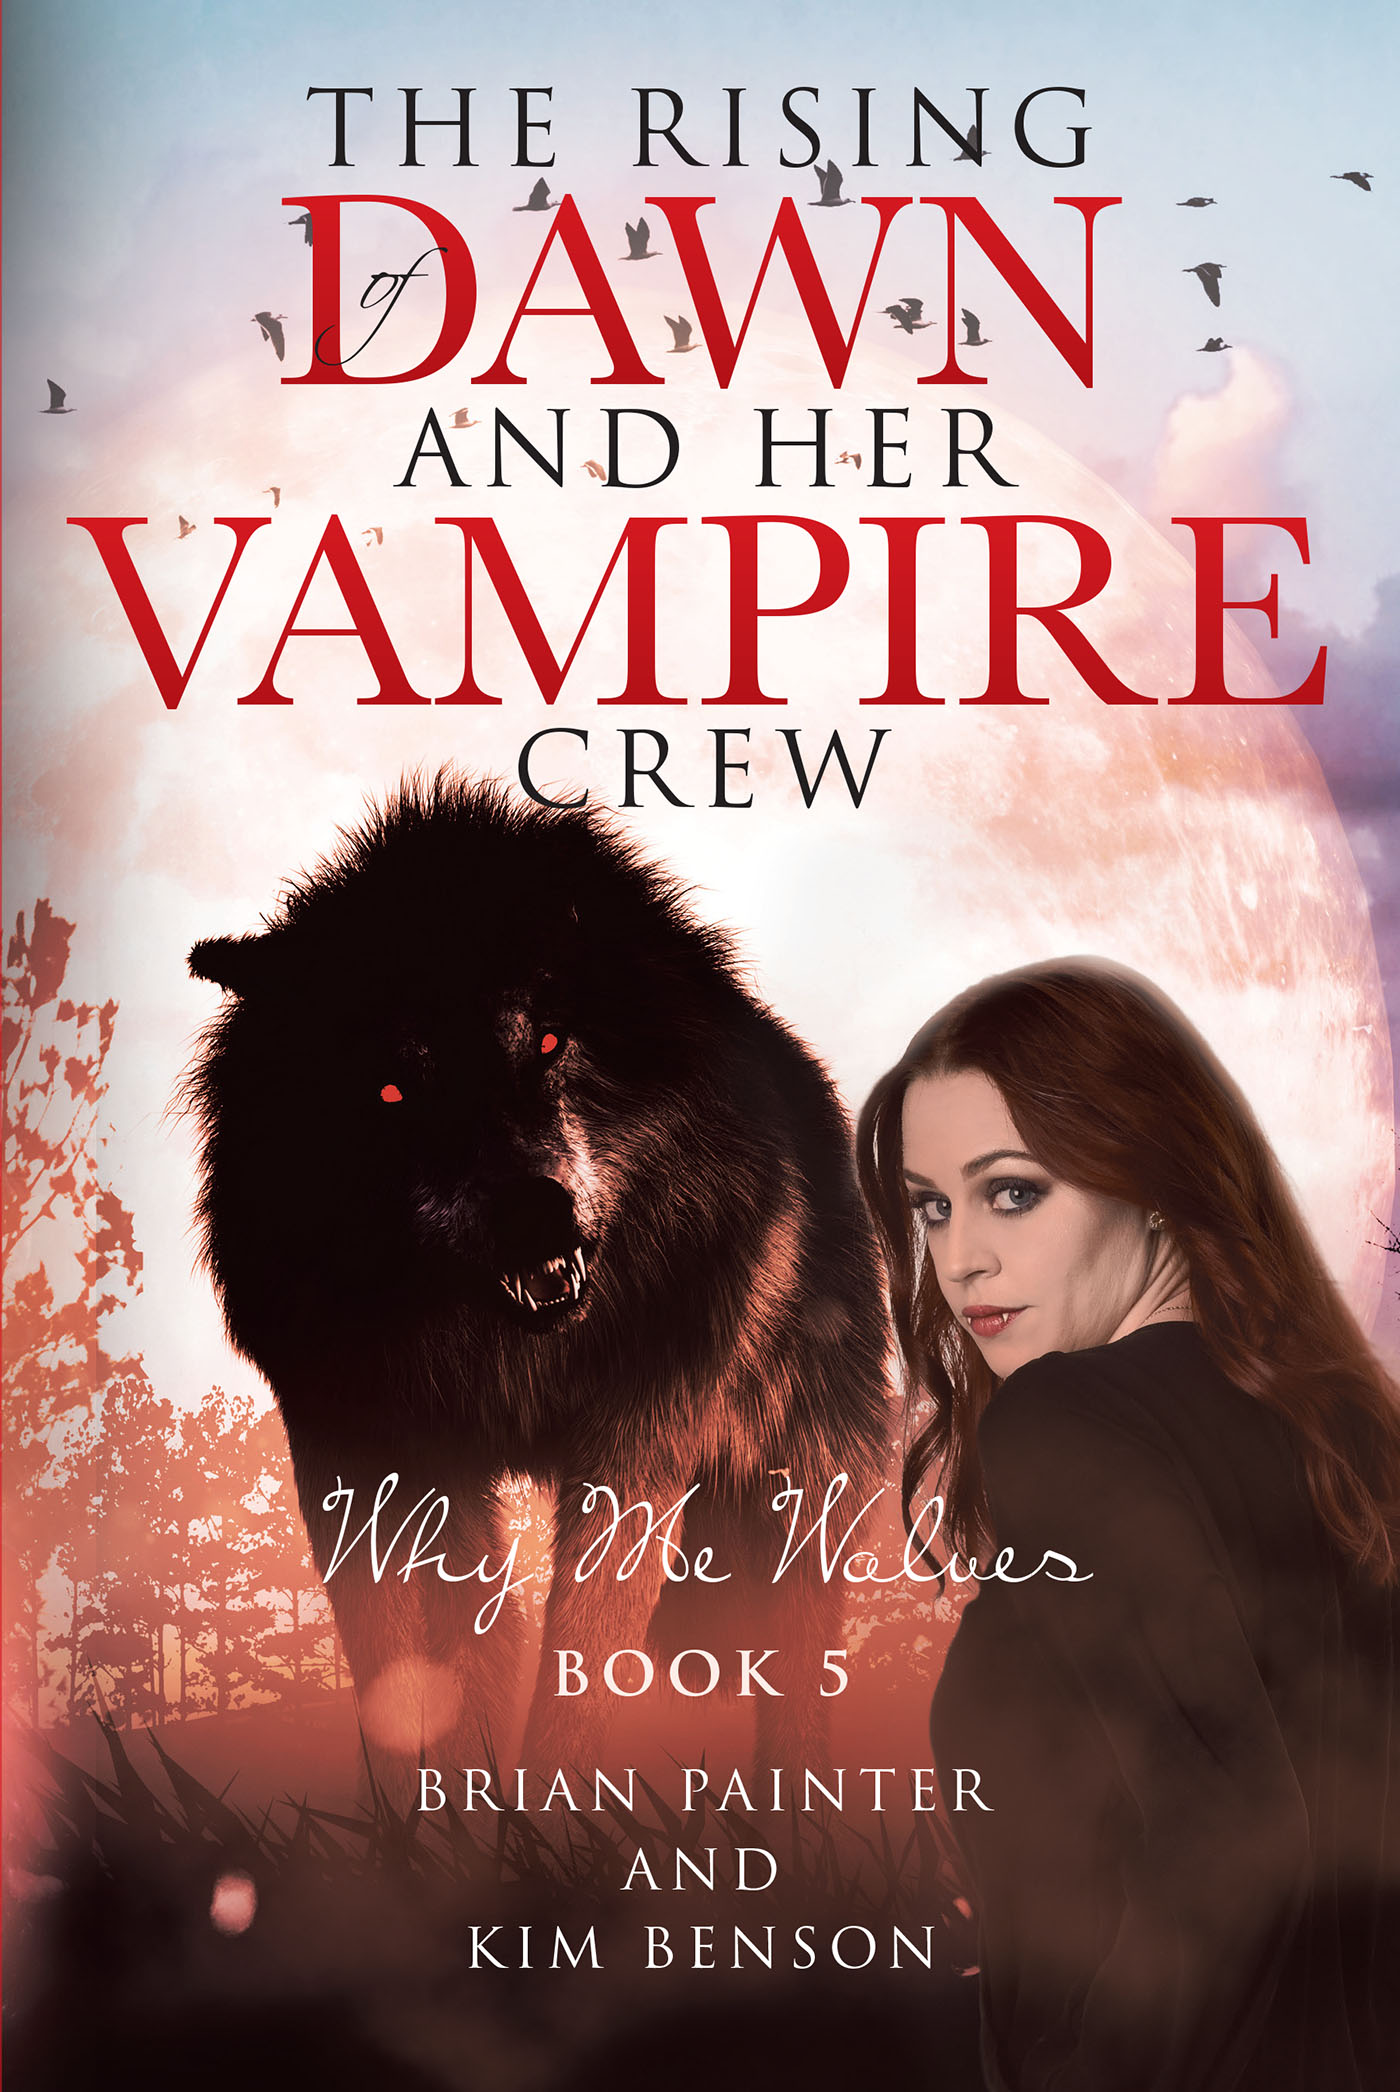 The Rising of Dawn and Her Vampire Crew Cover Image